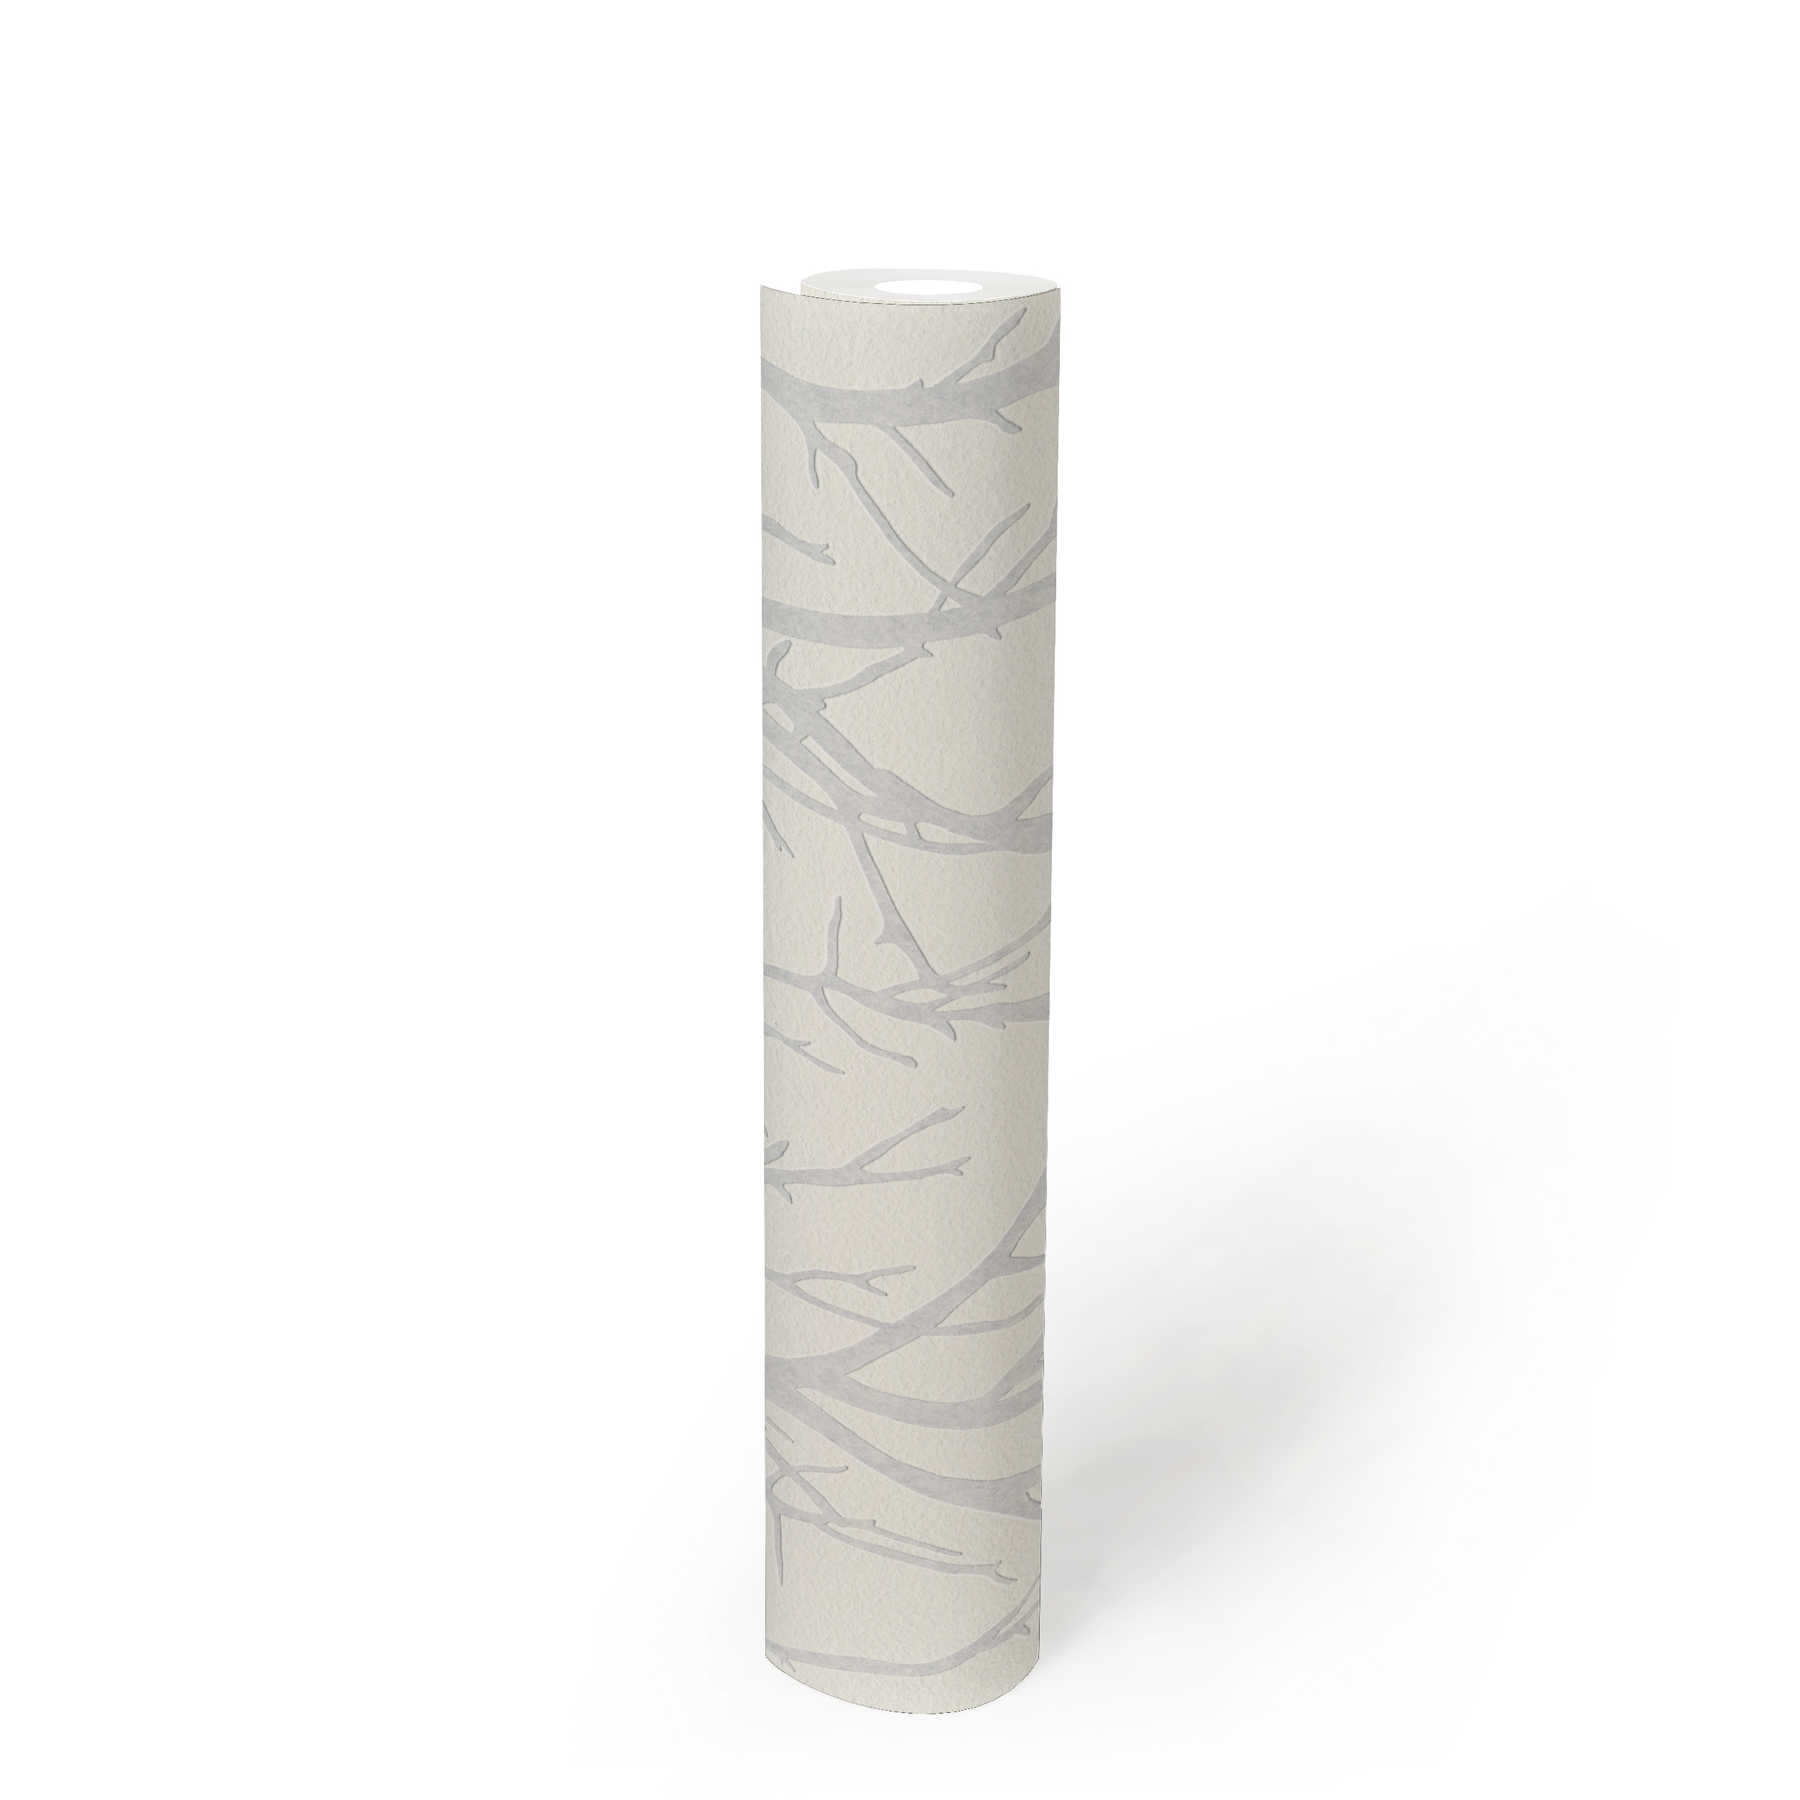             Paintable wallpaper with branch motif and 3D optics - Paintable, White
        